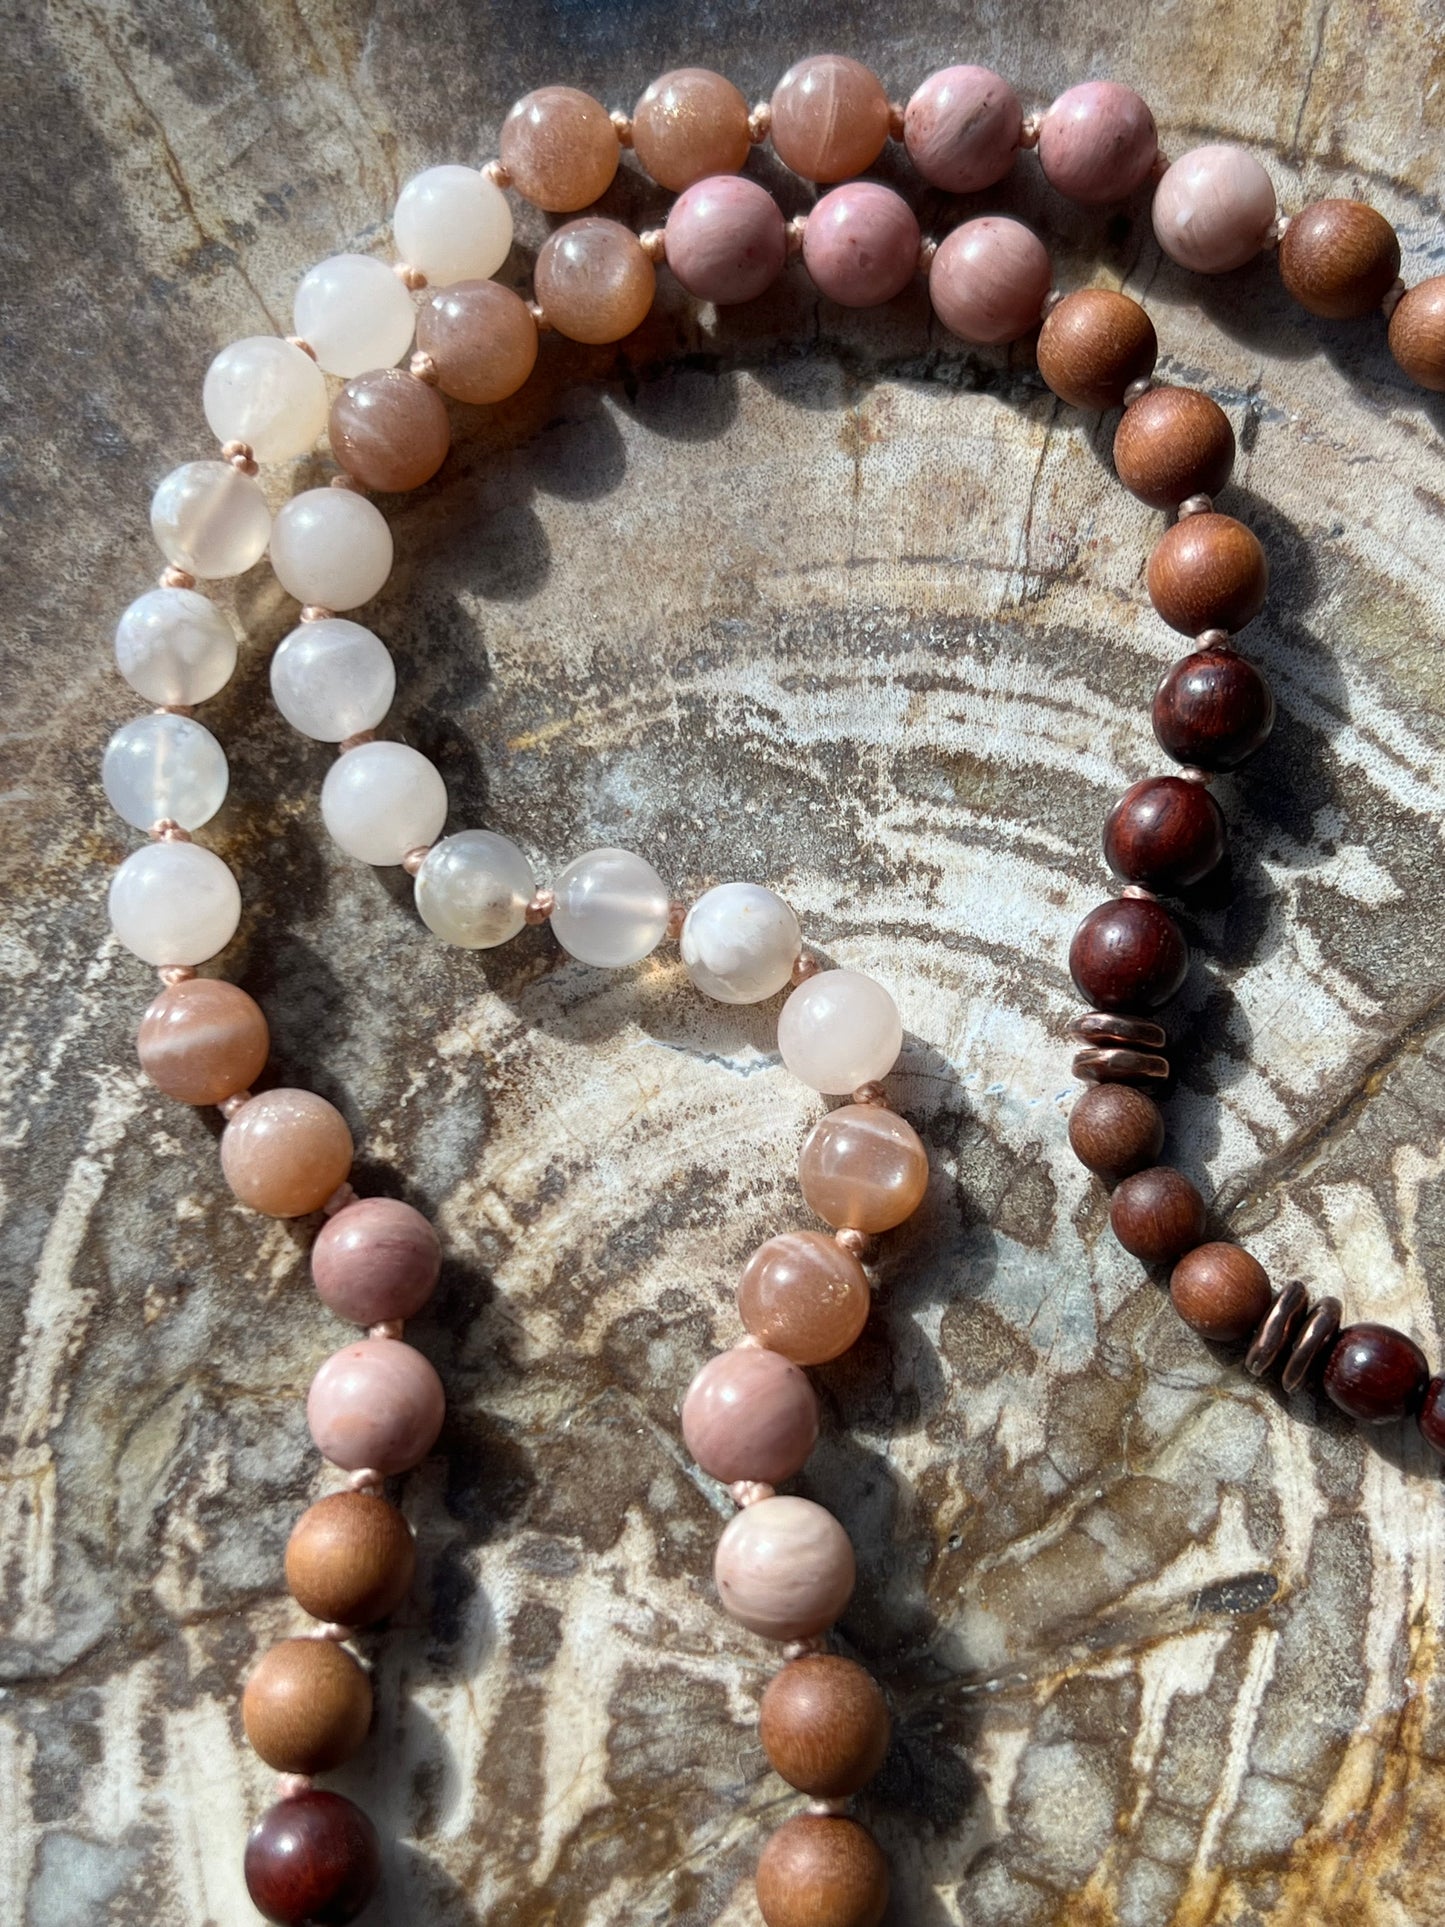 Half Mālā with Sunstone, Haitian Flower Rhodonite and Cherry Blossom Agate, Sandalwood, Indian Rosewood and Peach Aventurine with a Thai Buddha Pendant